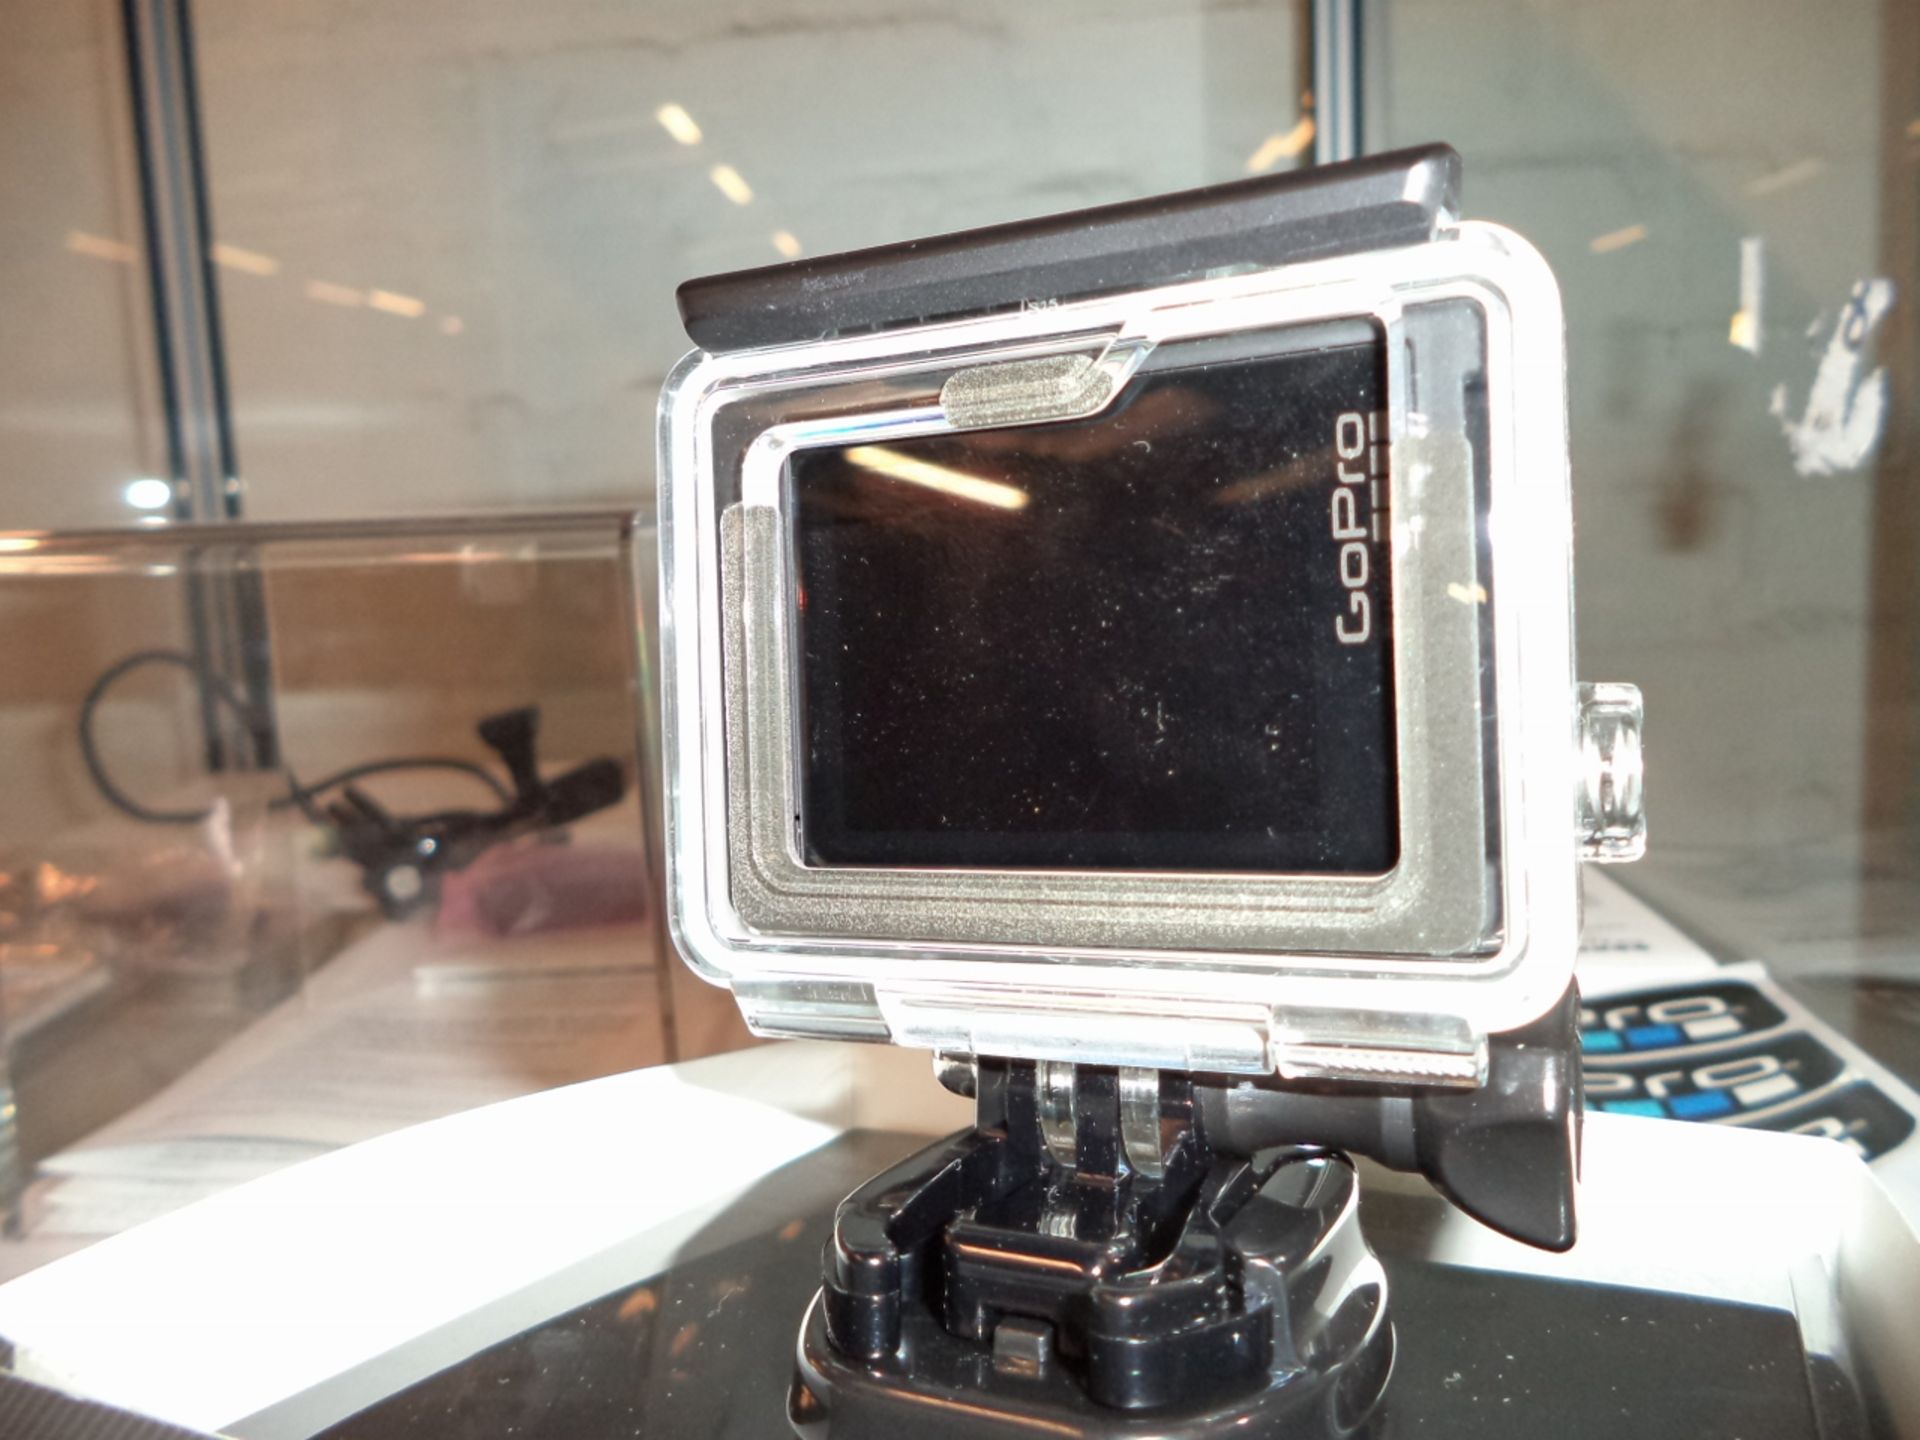 GoPro HERO4 Silver edition action video camera with built-in touchscreen display, box, manuals and - Image 3 of 11